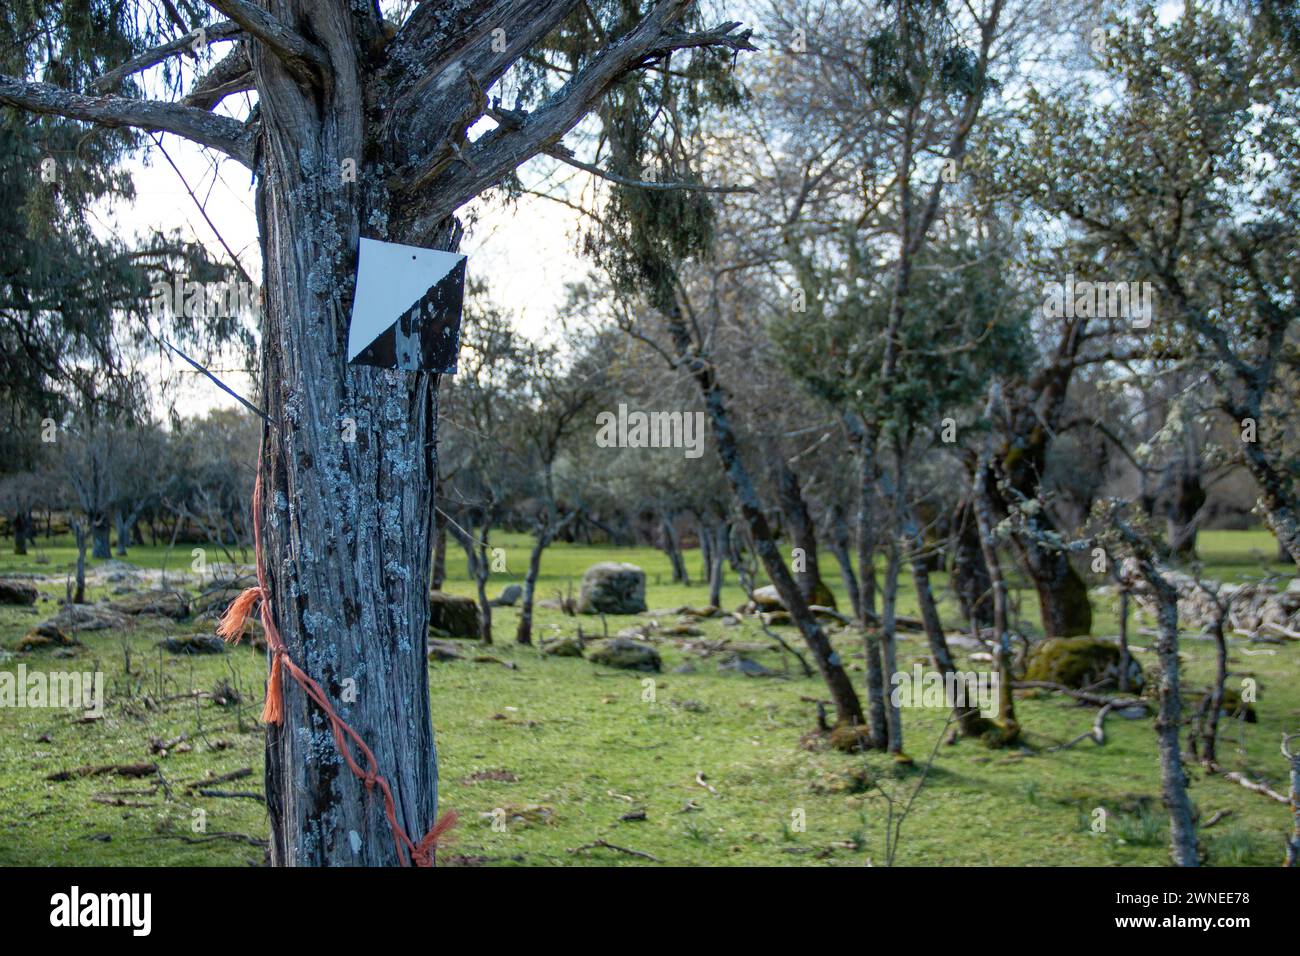 'Private hunting reserve' sign on a country property where it is delimited by metal fences Stock Photo